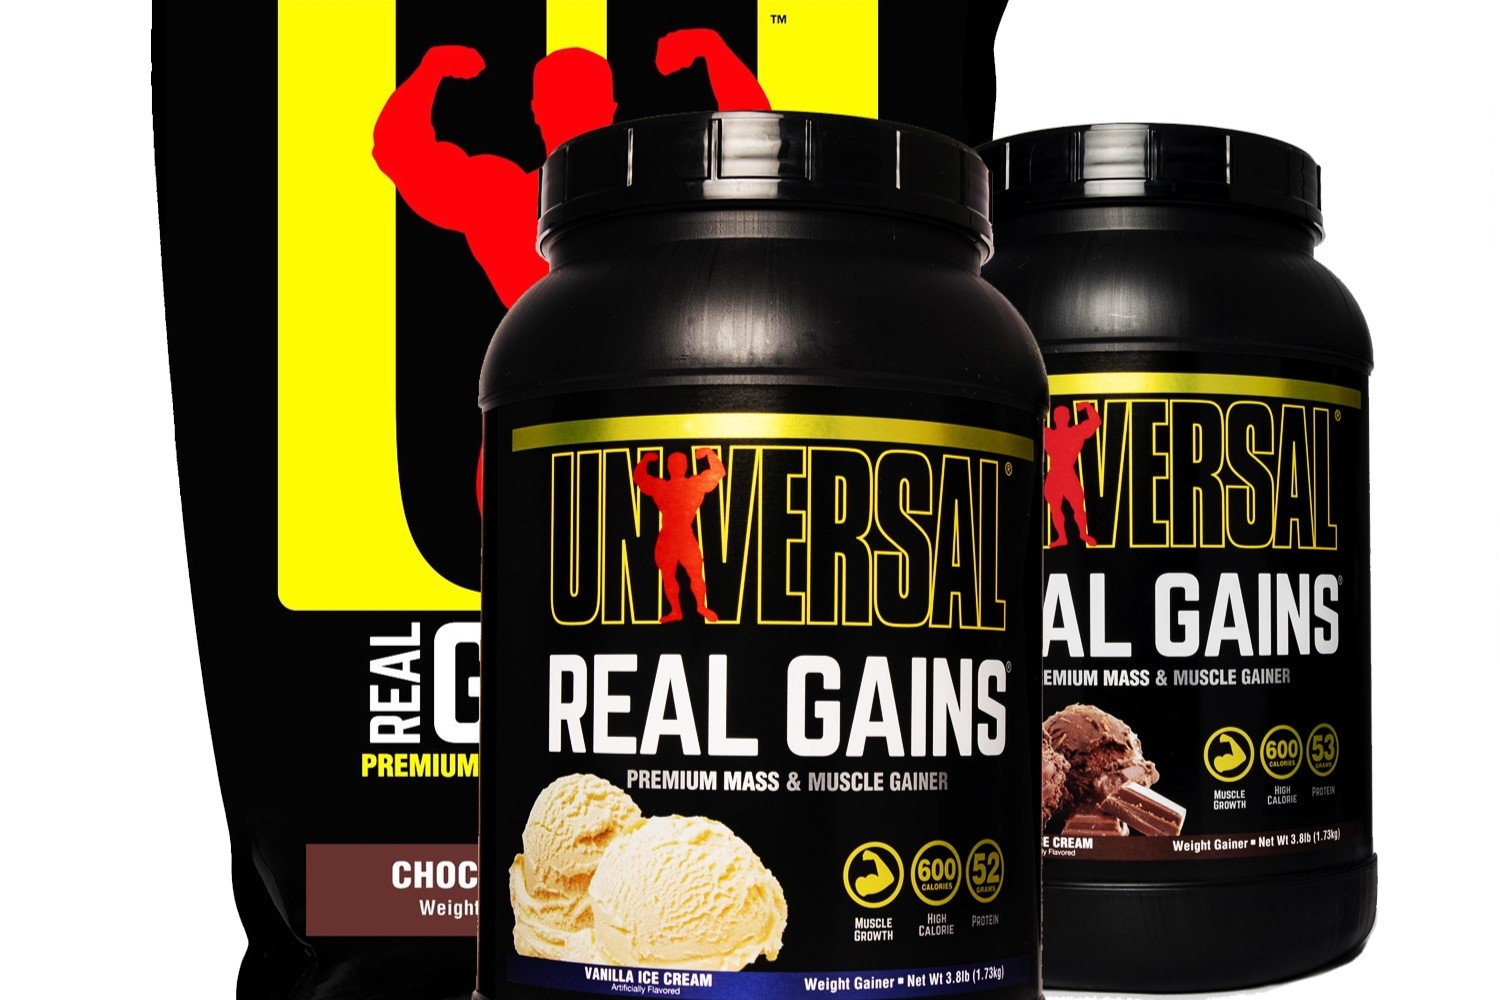 19-real-gains-nutrition-facts